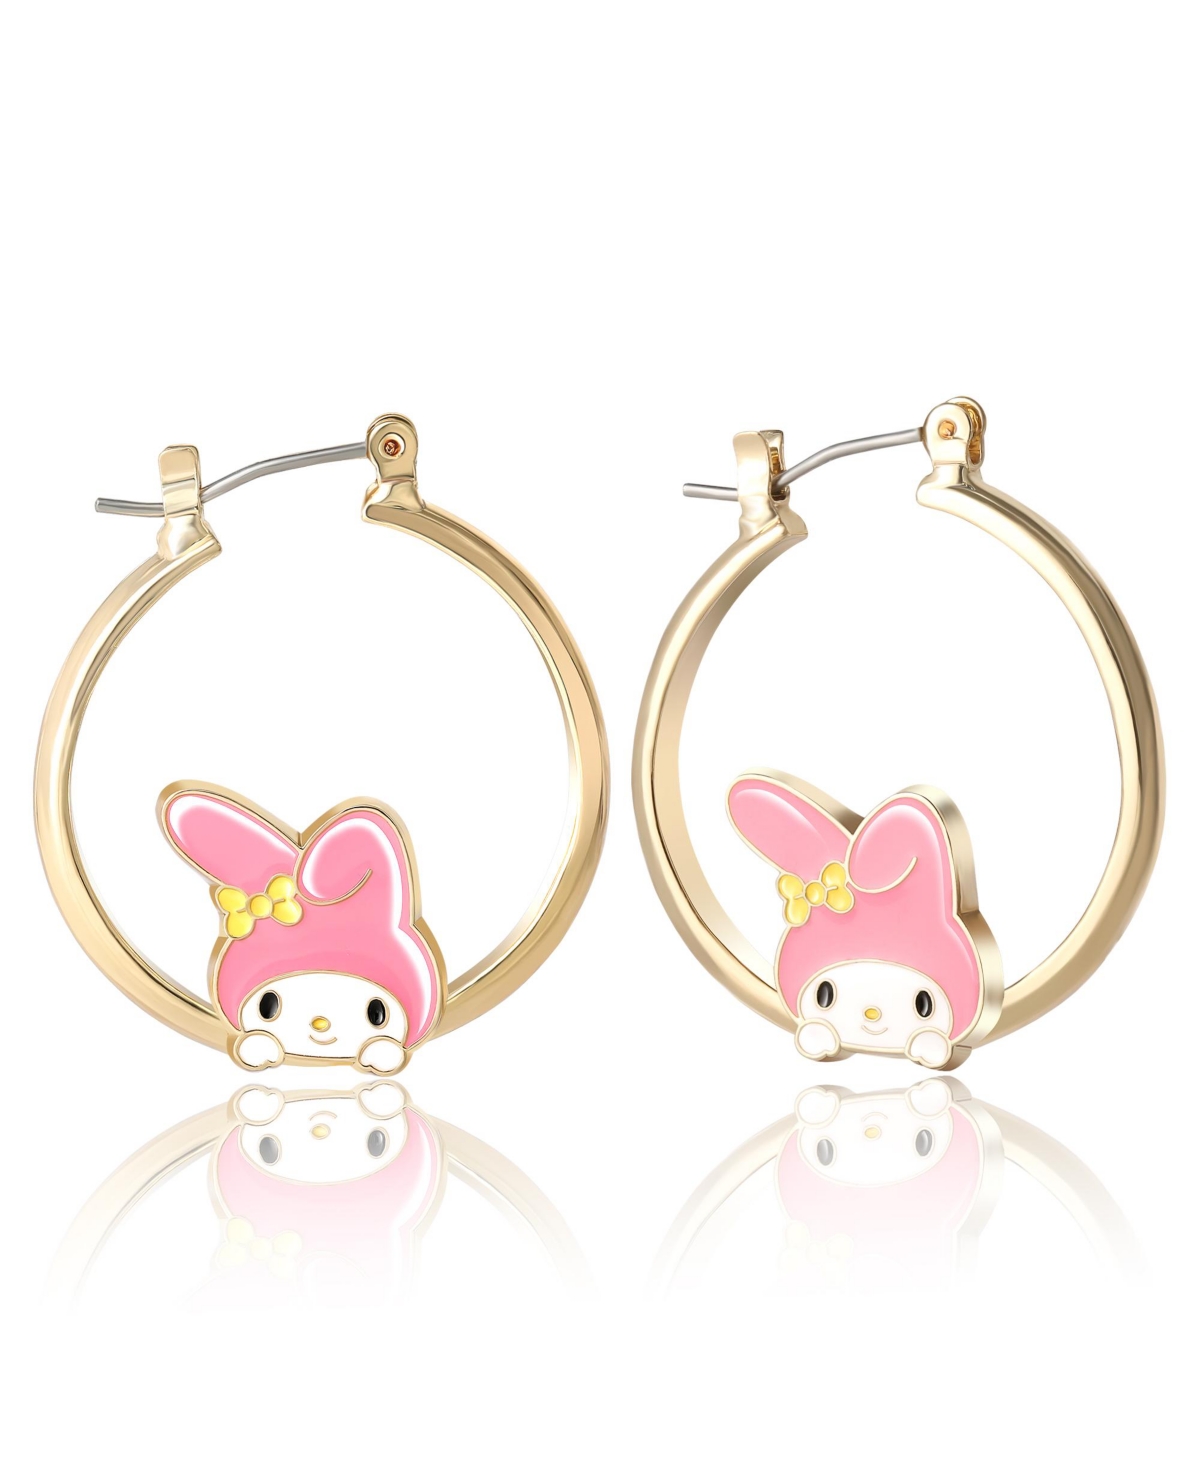 Sanrio Hello Kitty Women's Enamel Plated Hoop Earrings Officially Licensed - My Melody - Gold tone, pink